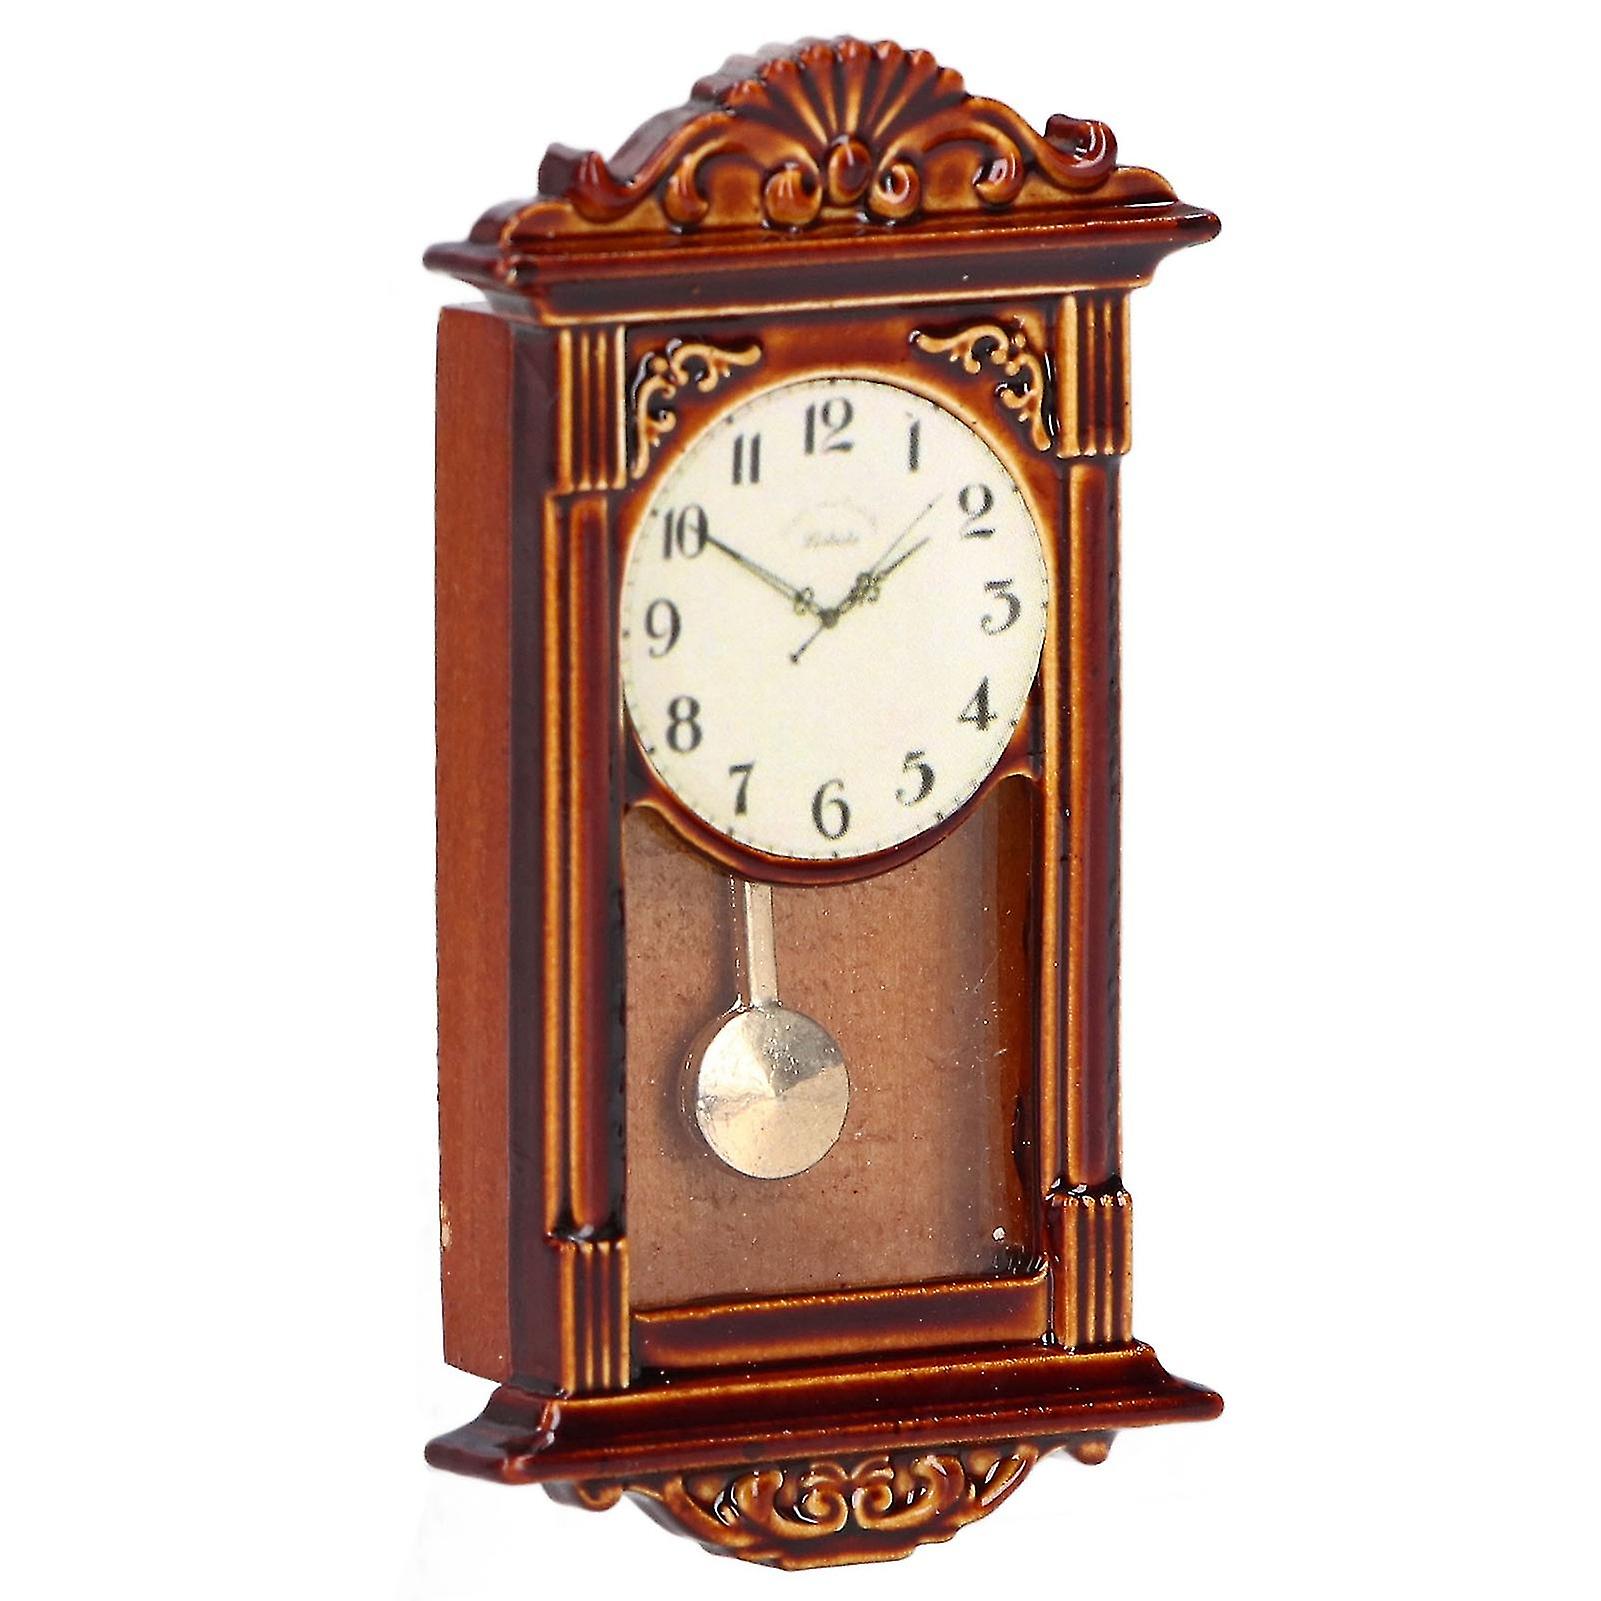 1:12 Dollhouse Clock Decoration Classic Style Exquisite Wooden Alloy Miniature Doll House Accessory